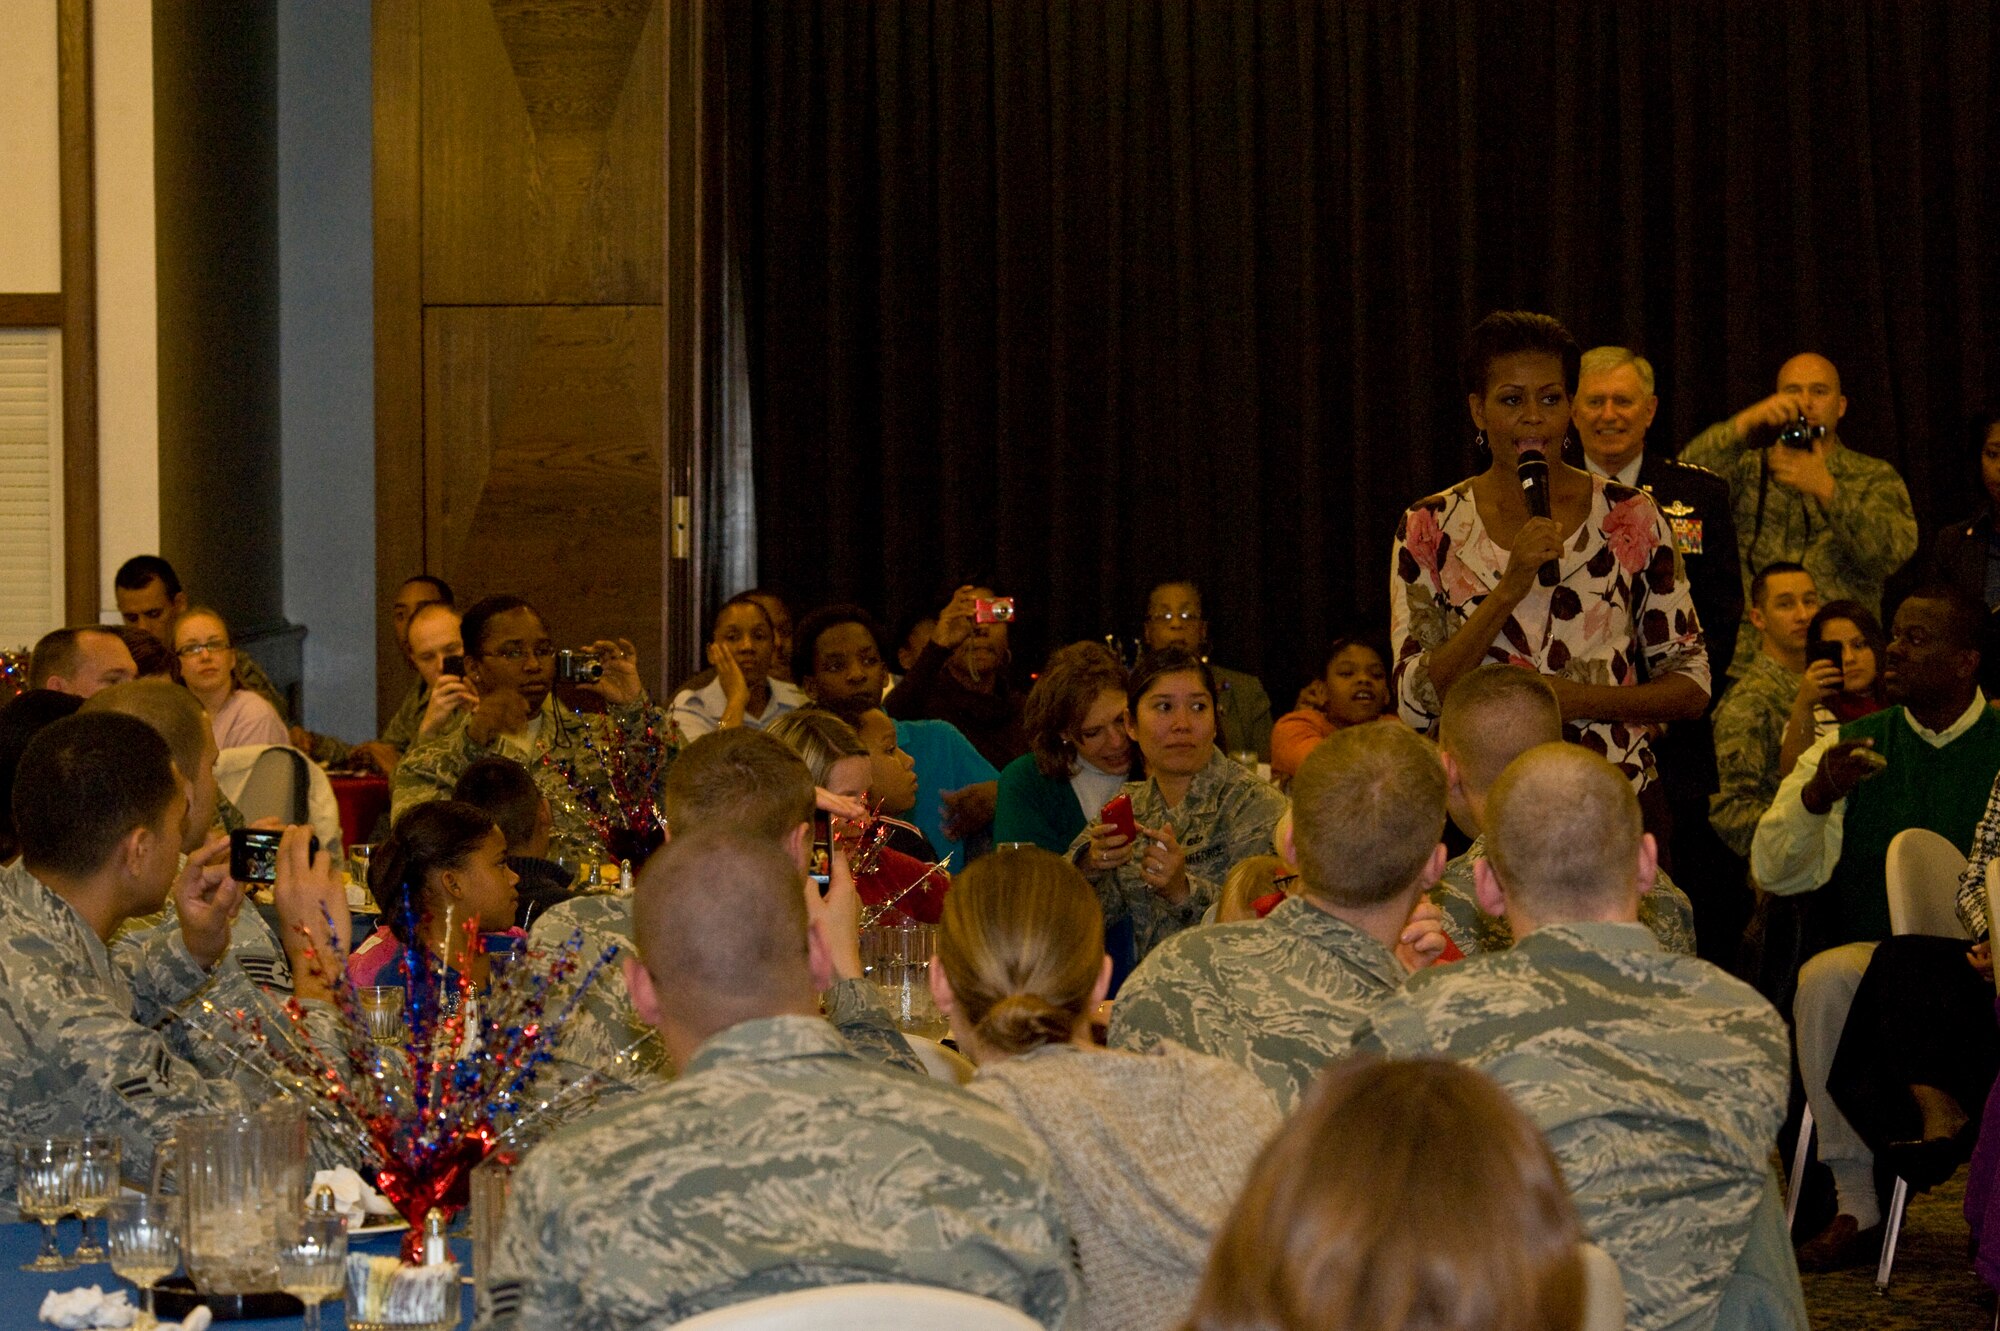 First Lady Michelle Obama talks with servicemembers and their families during a Veterans Day dinner at the Officers Club on Ramstein Air Base, Germany, Nov. 11, 2010. The First Lady made a surprise visit to Ramstein during her return from a nine-day tour of Asia to show her support for servicemembers and their families during this Veterans Day. She met with wounded servicemembers at Landstuhl Regional Medical Center, served lunch, talked briefly to the servicemembers and families and met with German first lady Bettina Wulff before flying on to the United States. (U.S. Air Force photo/Tech Sgt. Wayne Clark) 